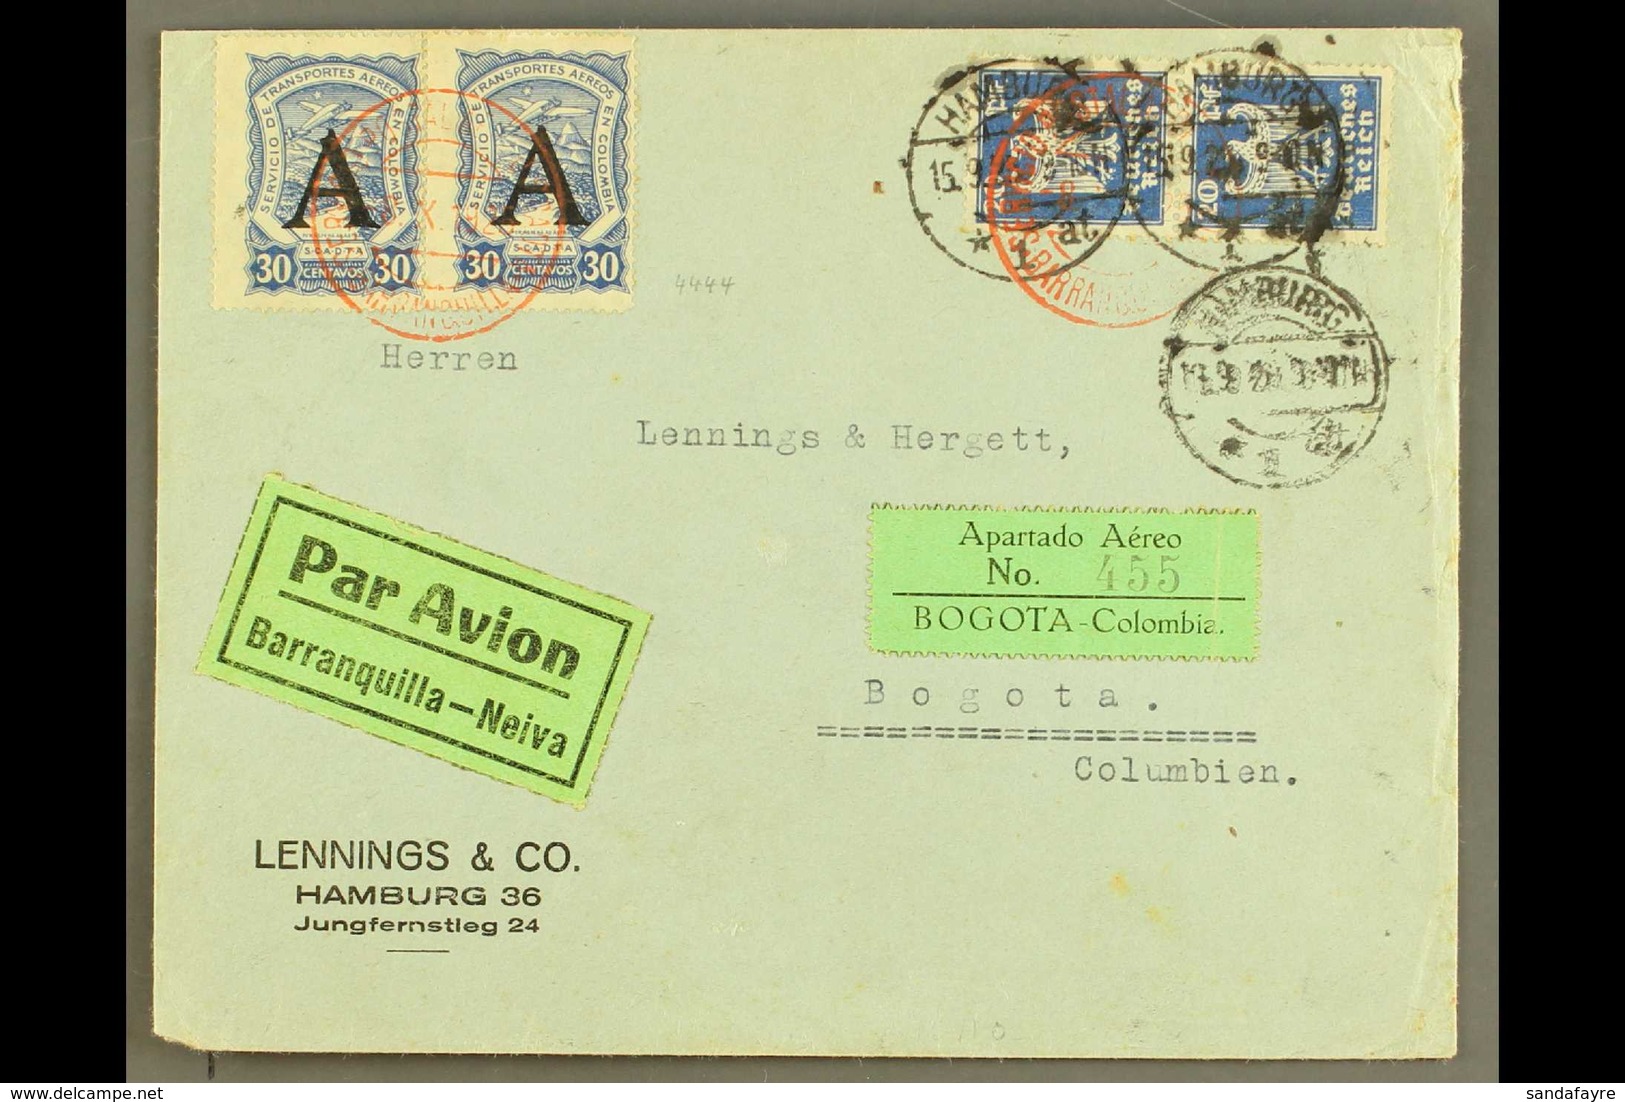 SCADTA 1925 (15 Sep) Cover From Germany Addressed To Bogota, Bearing Germany 20pf Pair Tied By "Hamburg" Cds's And SCADT - Colombia